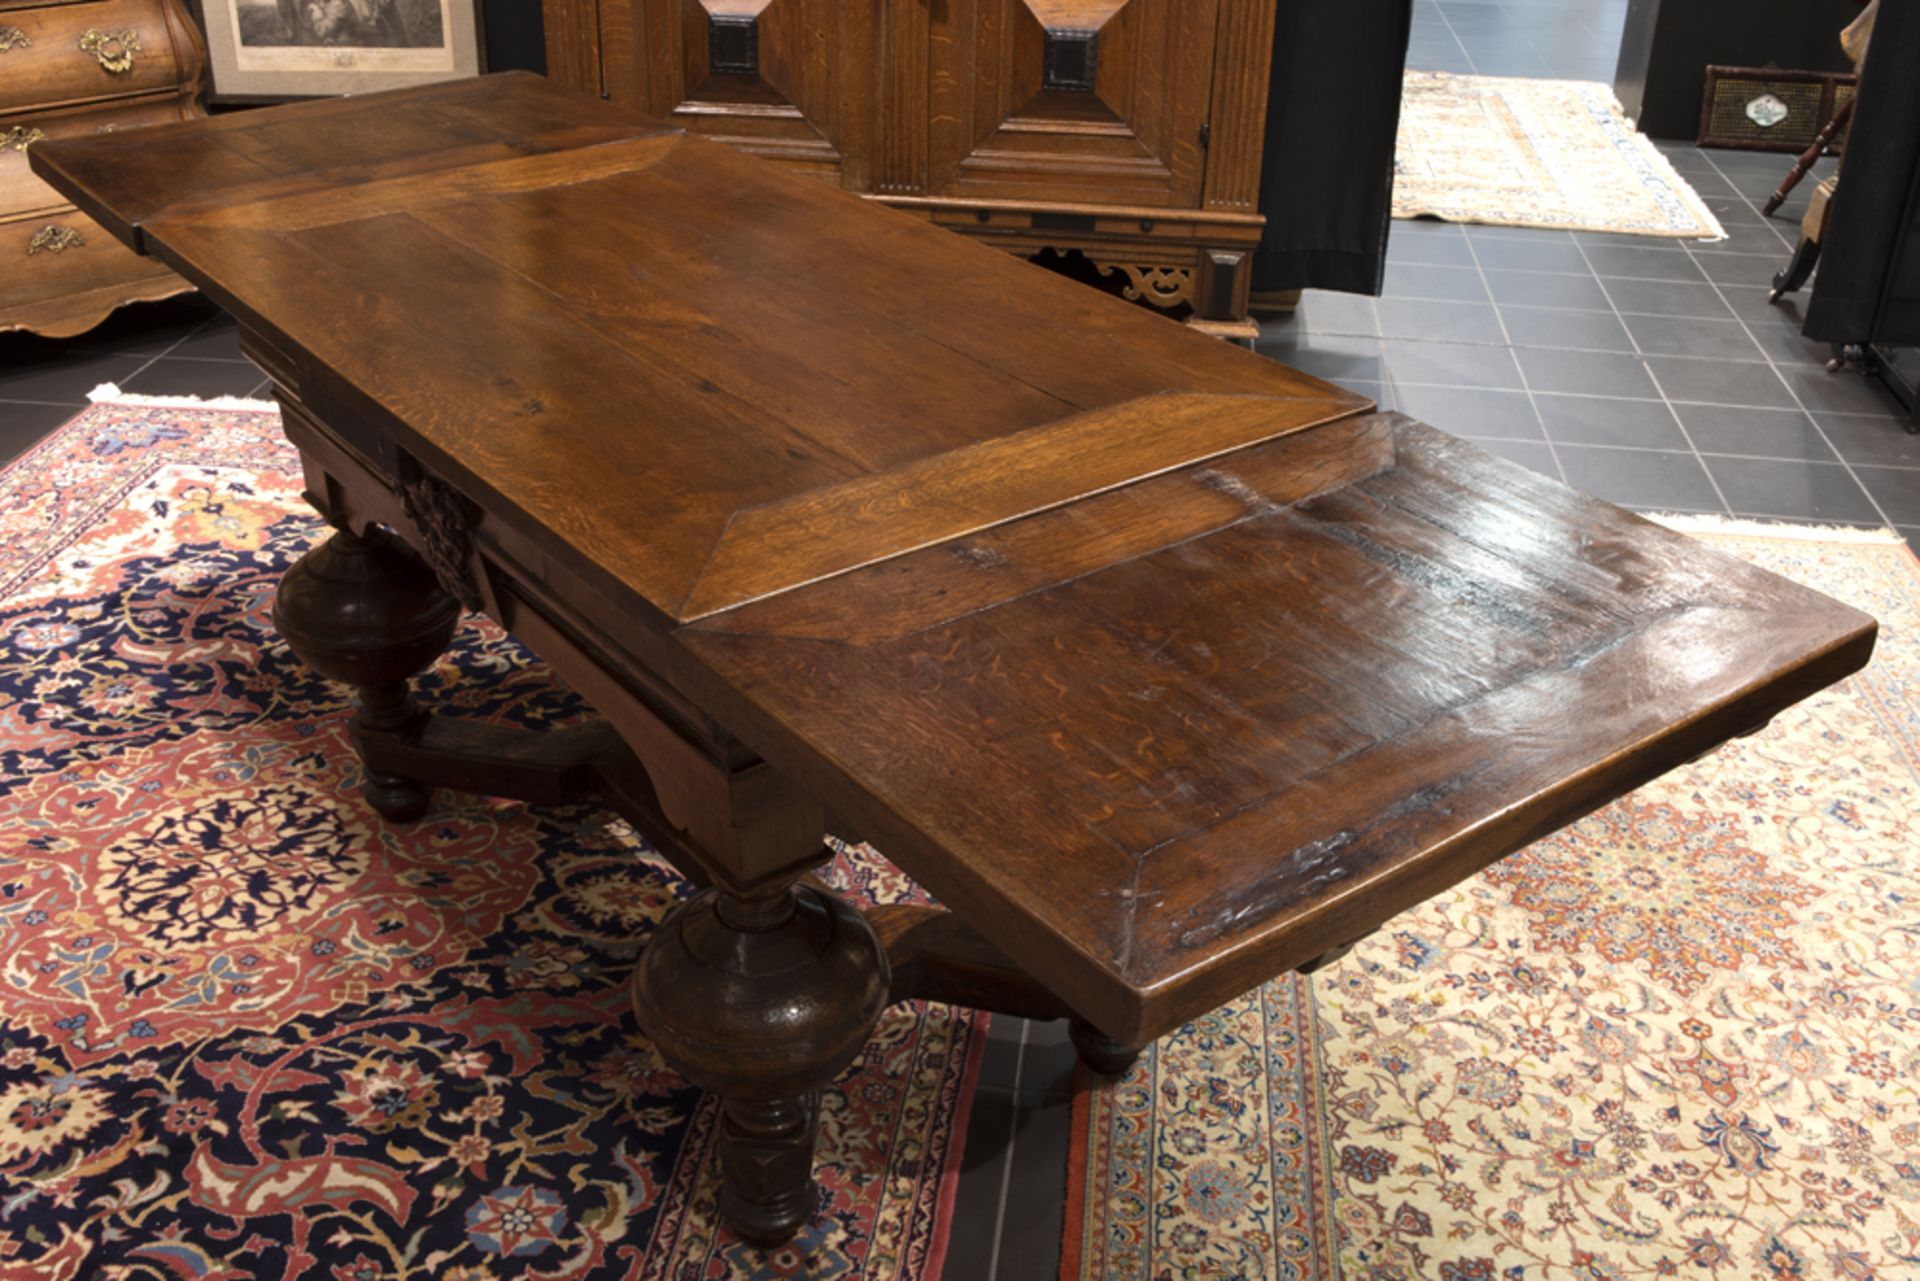 very good 17th Cent. Low Countries oak table with typical feet and with on both sides a walnut bas- - Image 3 of 3